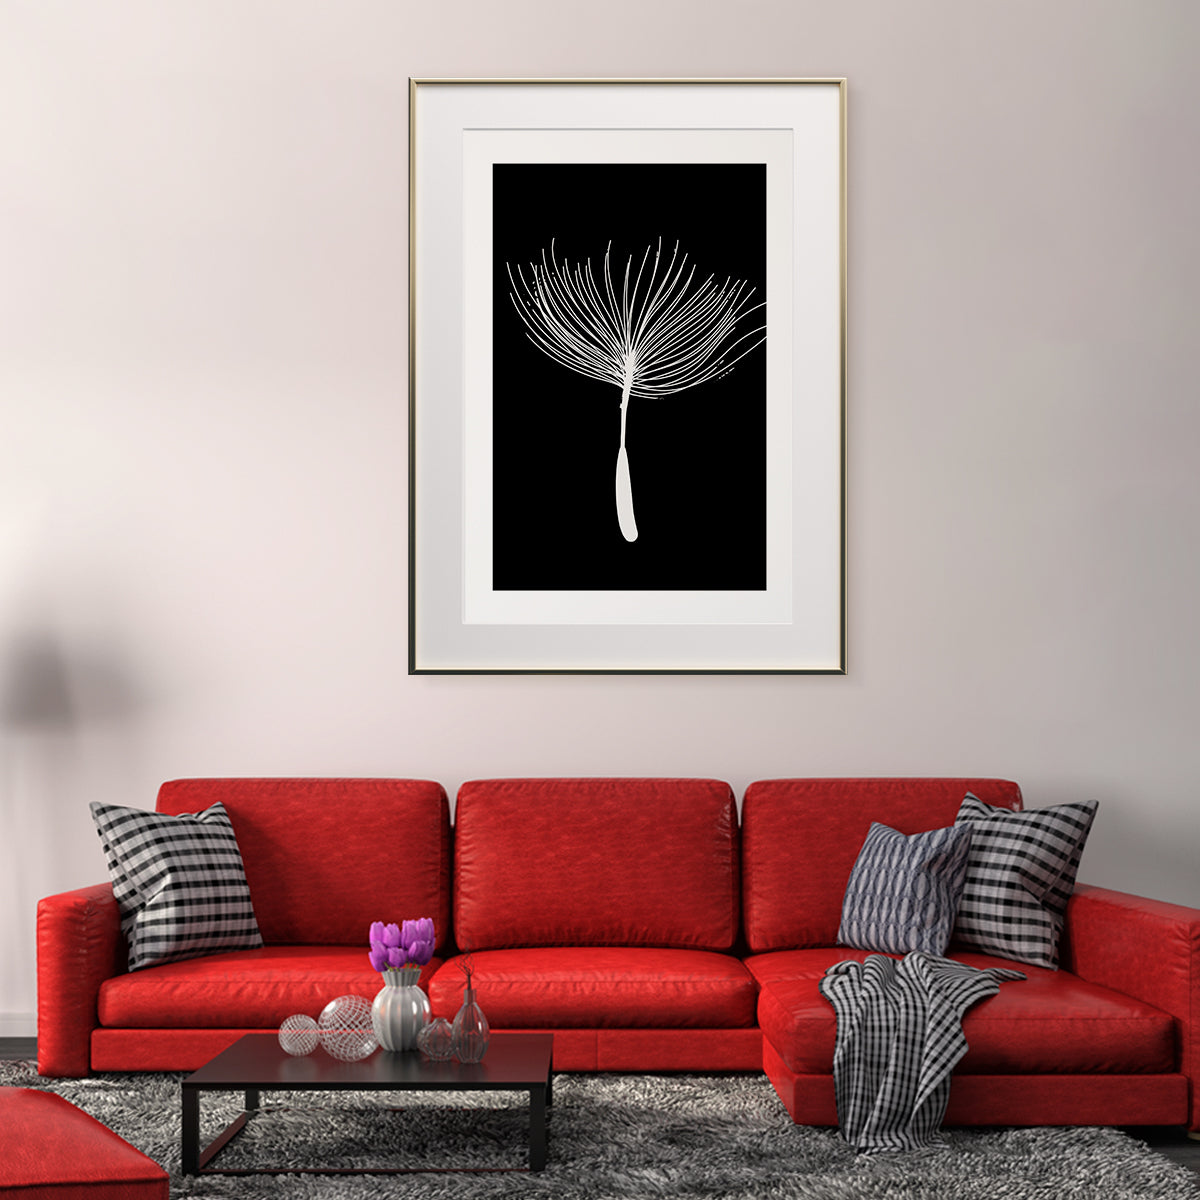 Minimalist Dandelion Seed Poster Modern Art Prints in Black And White-Vertical Posters NOT FRAMED-CetArt-8″x10″ inches-CetArt